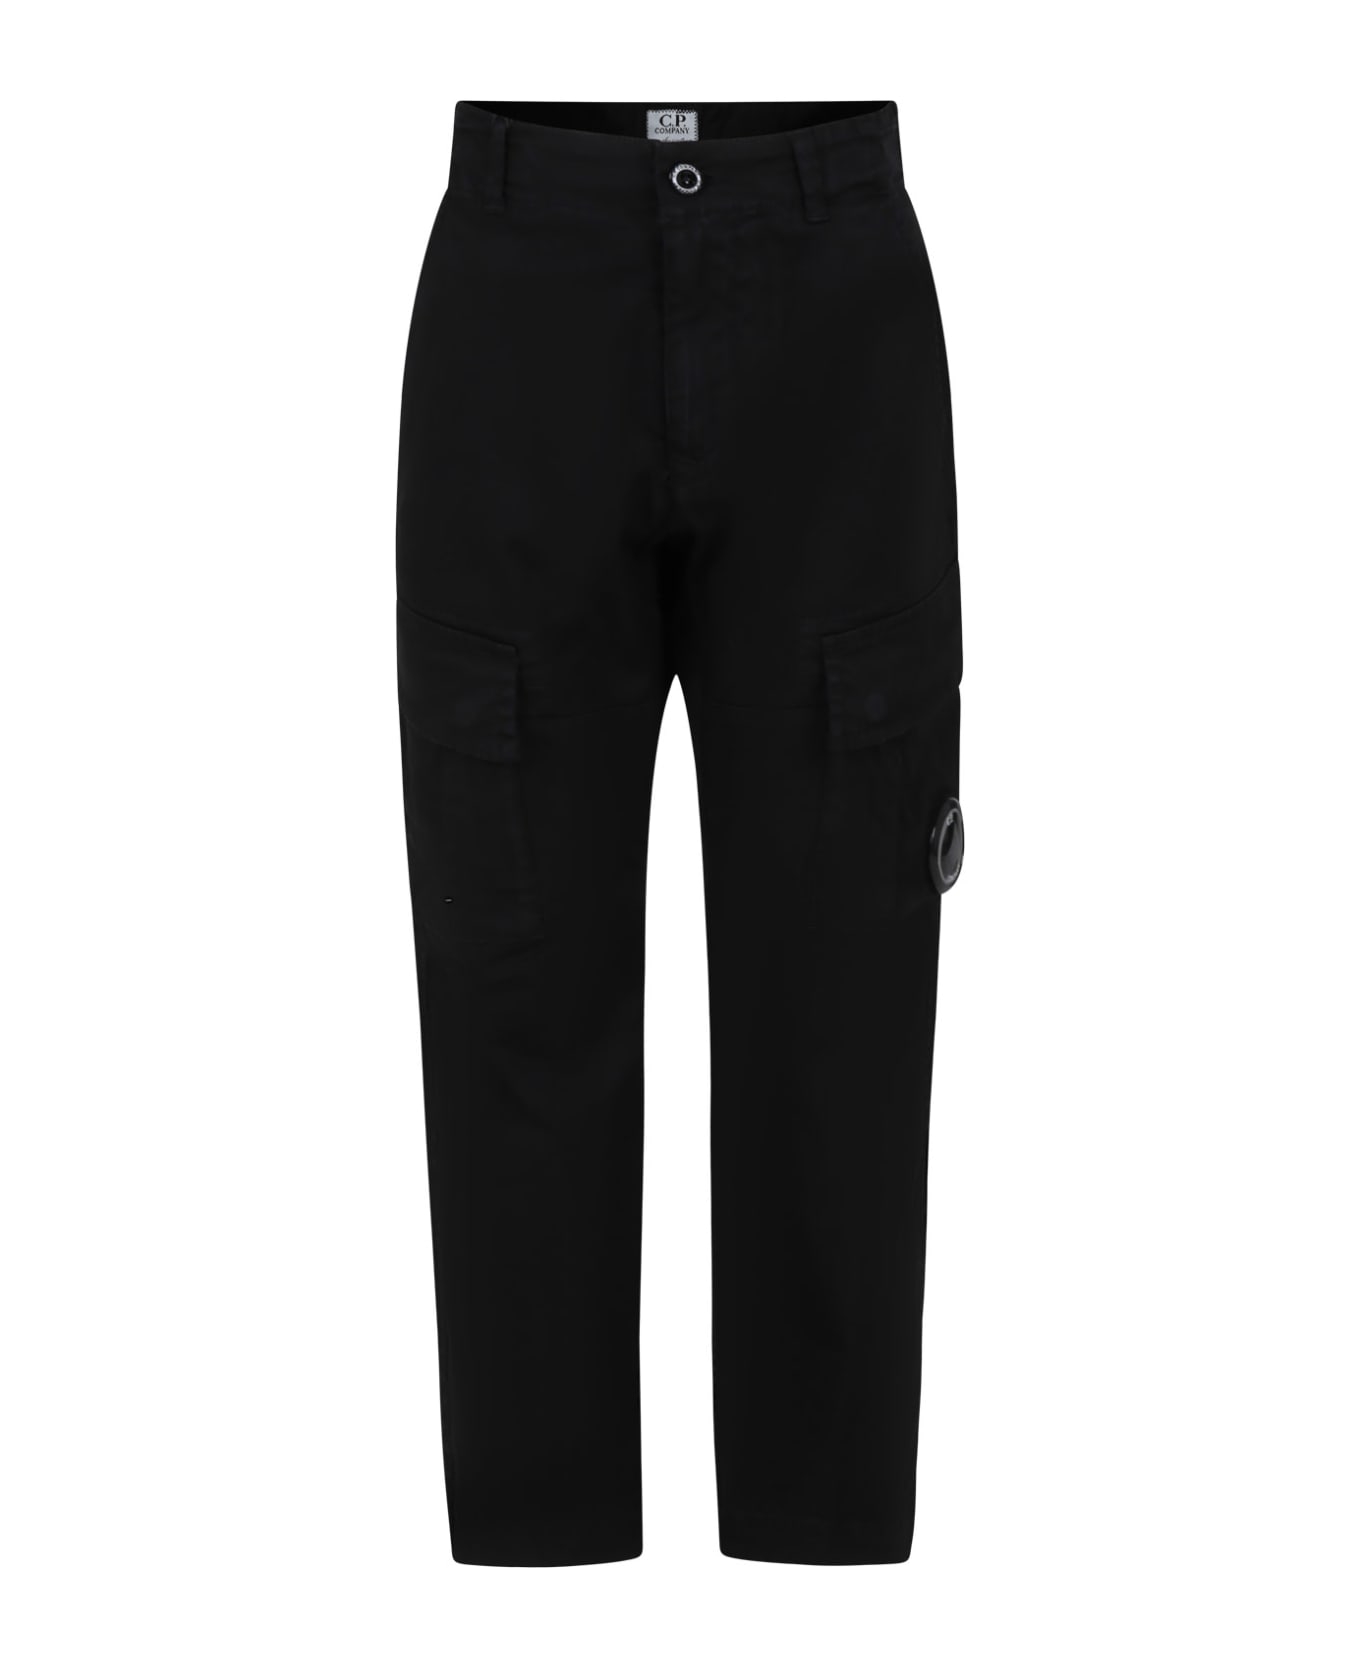 C.P. Company Undersixteen Black Trousers For Boy With C.p. Company Lens. - Black